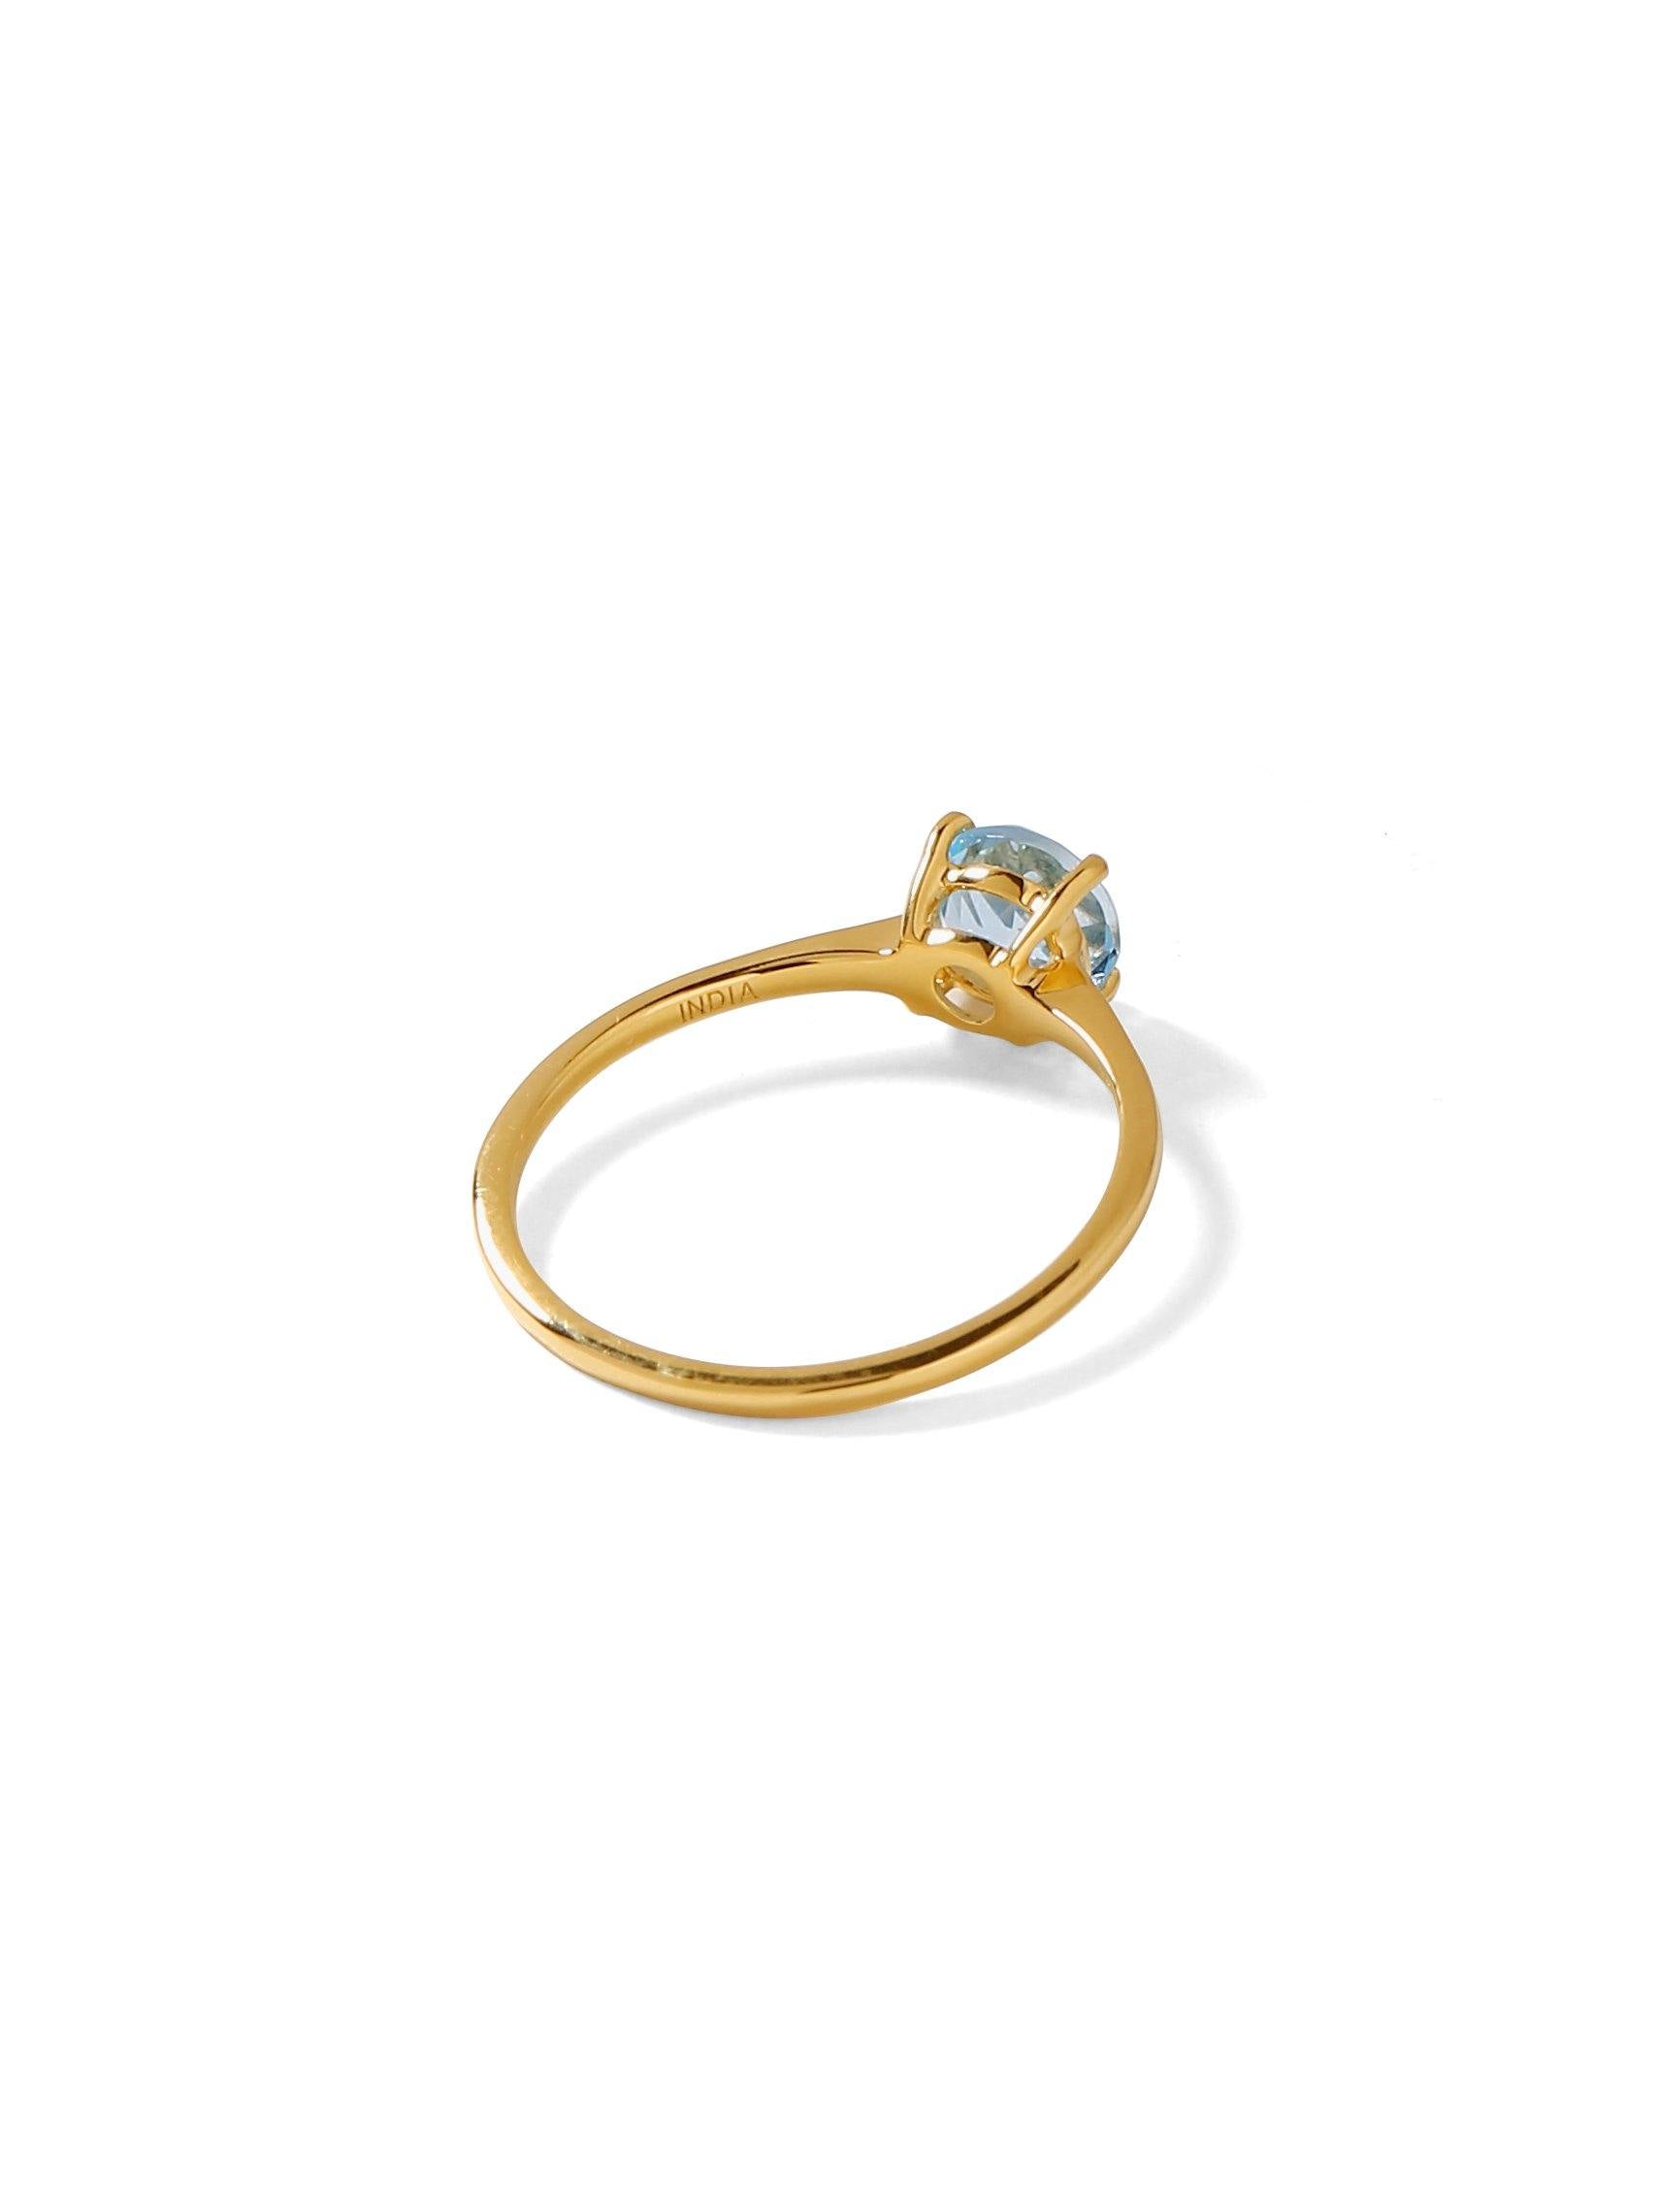 1.03 Ct Sky Blue Topaz Solid 10k Yellow Gold Solitaire Ring Jewelry - YoTreasure